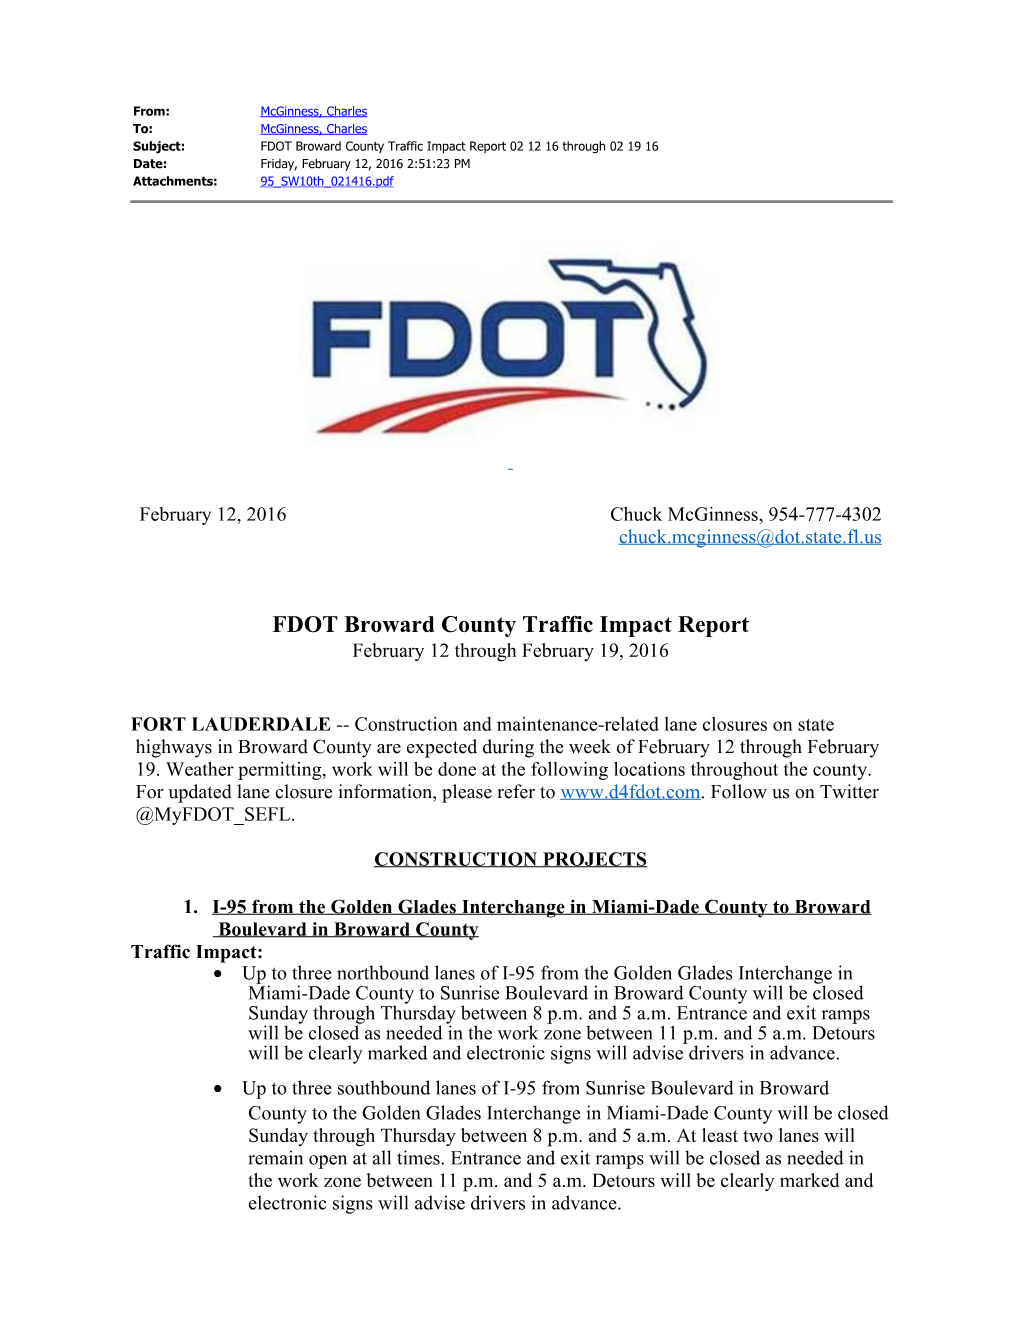 FDOT Broward County Traffic Impact Report 02 12 16 Through 02 19 16 Date: Friday, February 12, 2016 2:51:23 PM Attachments: 95 Sw10th 021416.Pdf